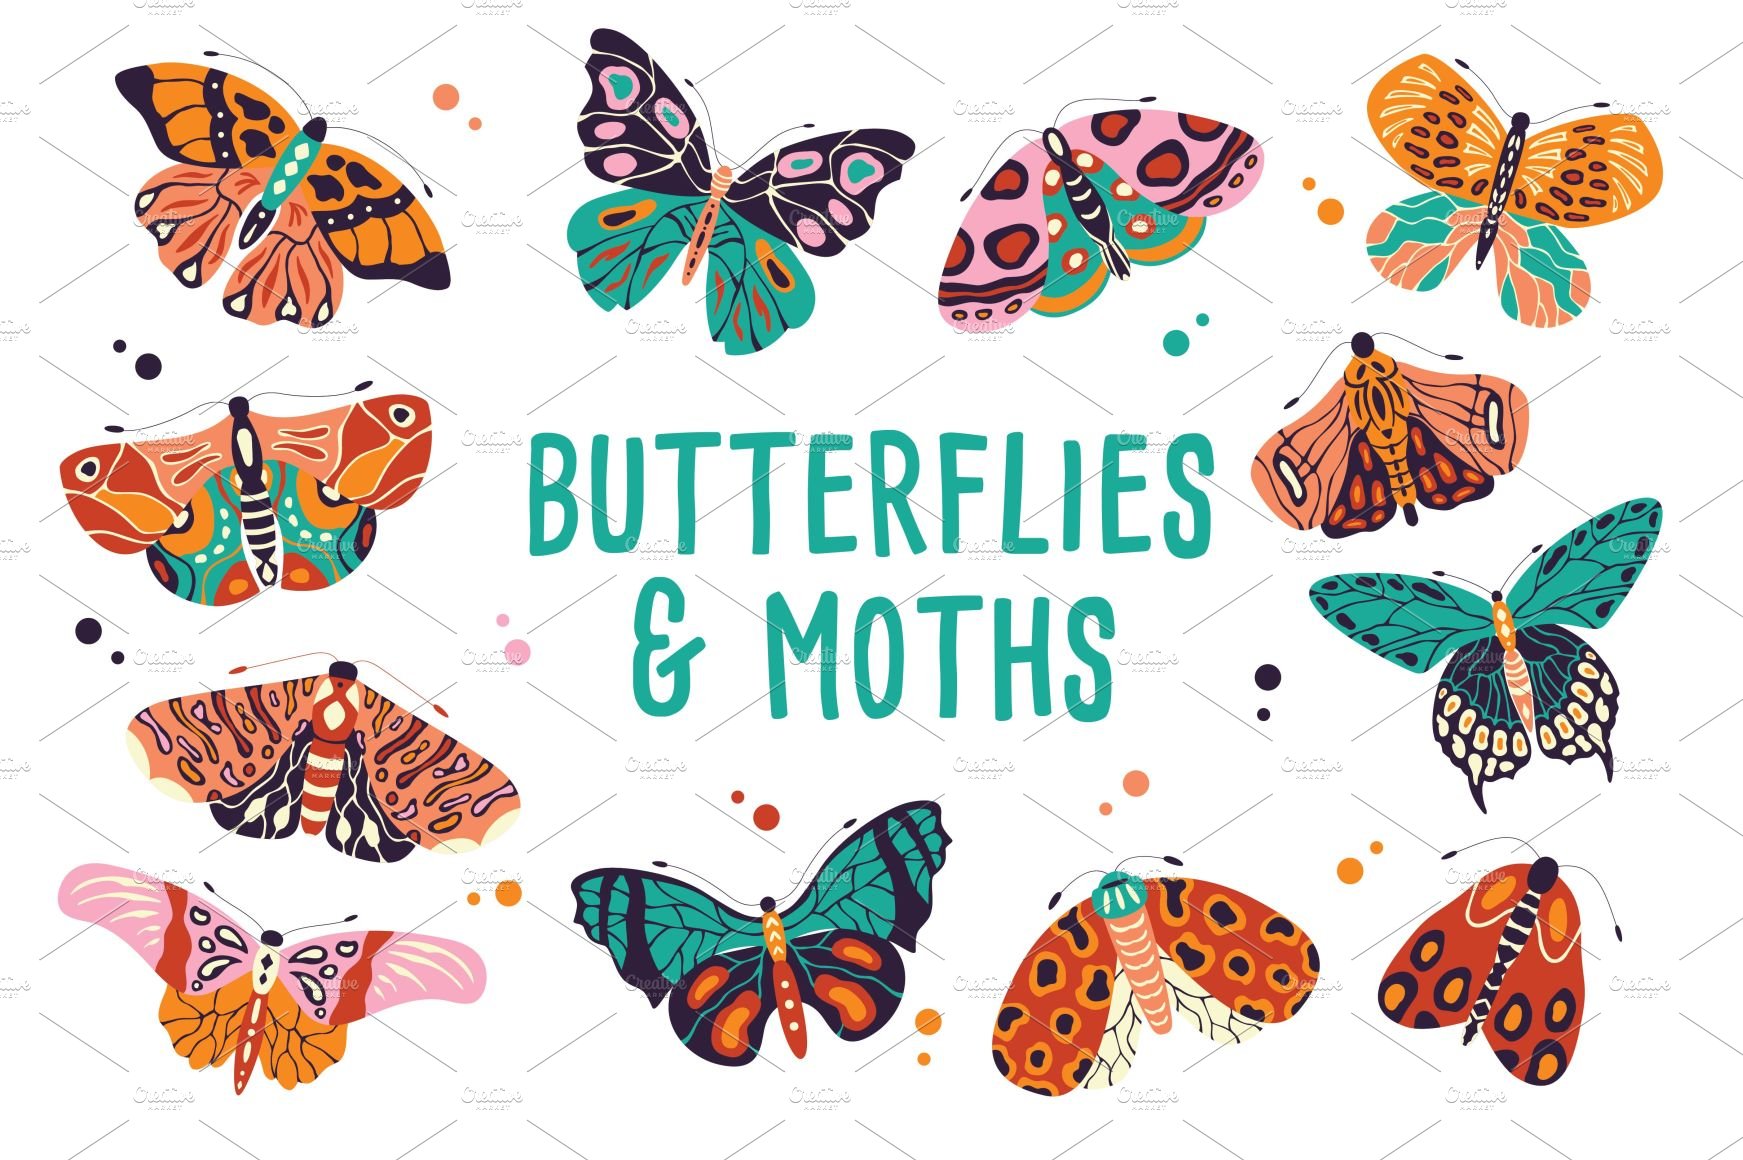 Spring Butterflies and Moths cover image.